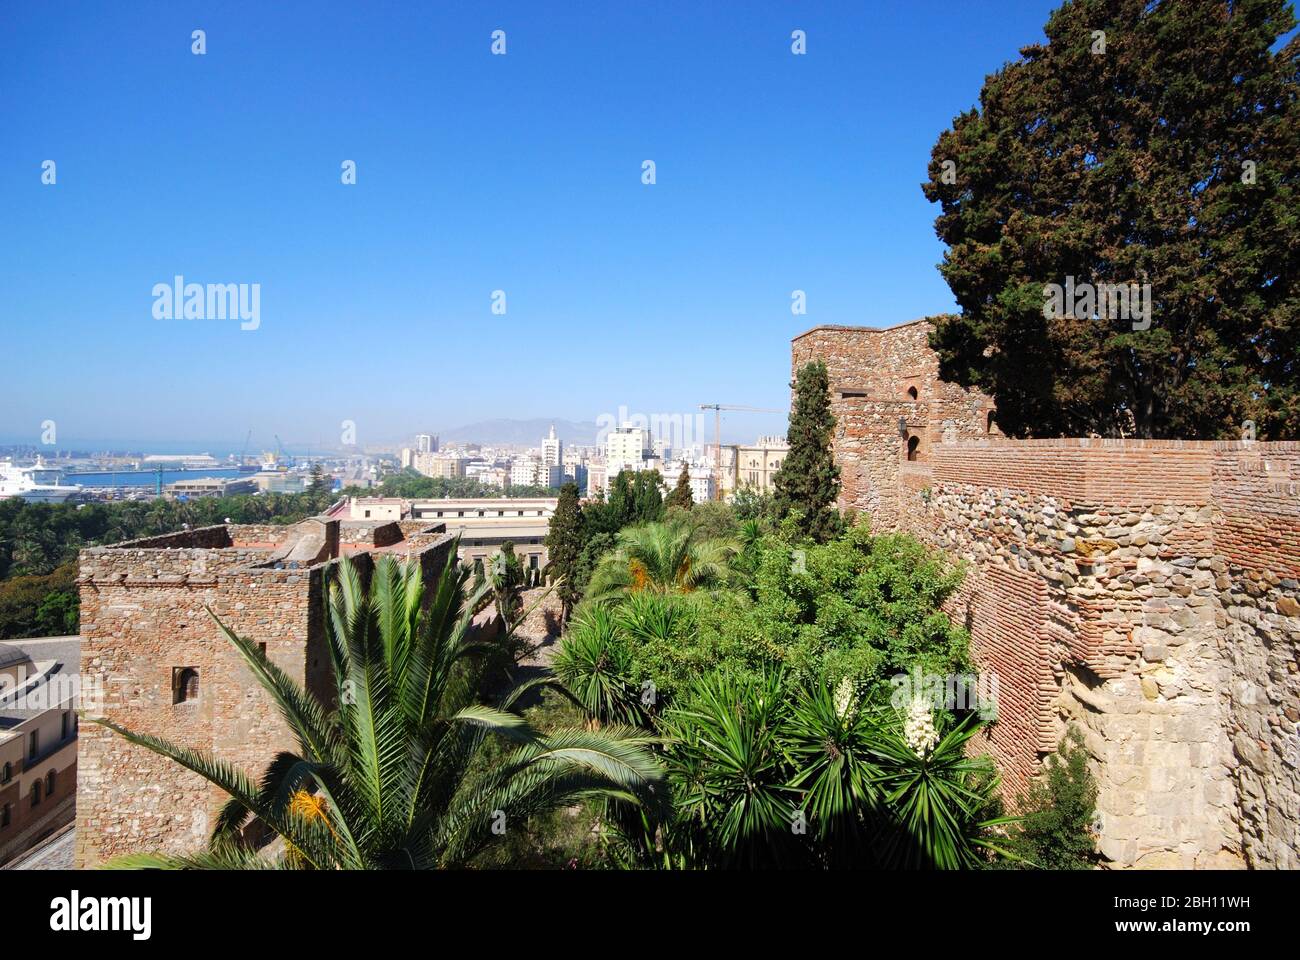 Elevated harbour view with the Christs Gate of Malaga castle in the foreground, Malaga, Malaga Province, Andalucia, Spain. Stock Photo